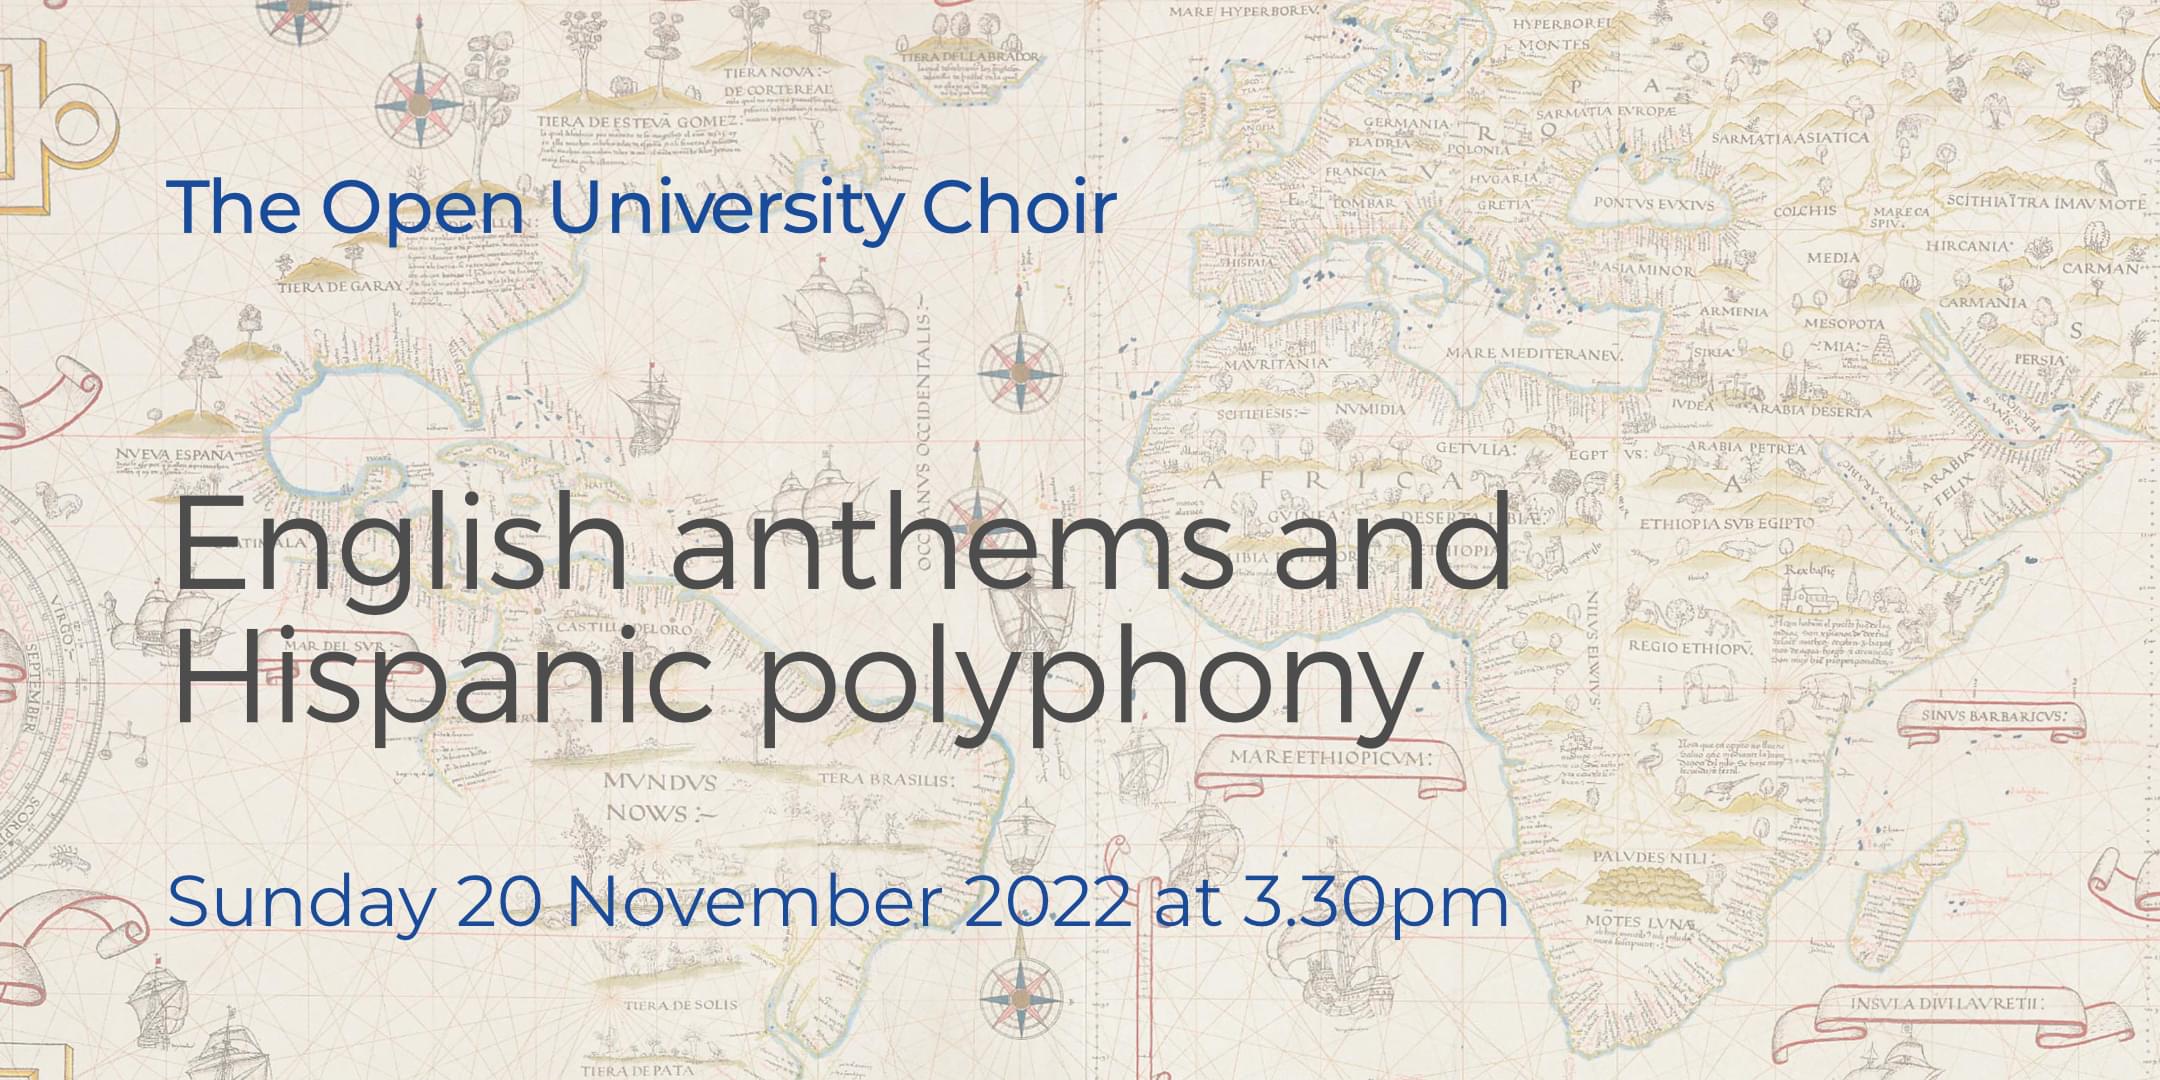 Open University Choir concert: English anthems and Hispanic polyphony Top Image